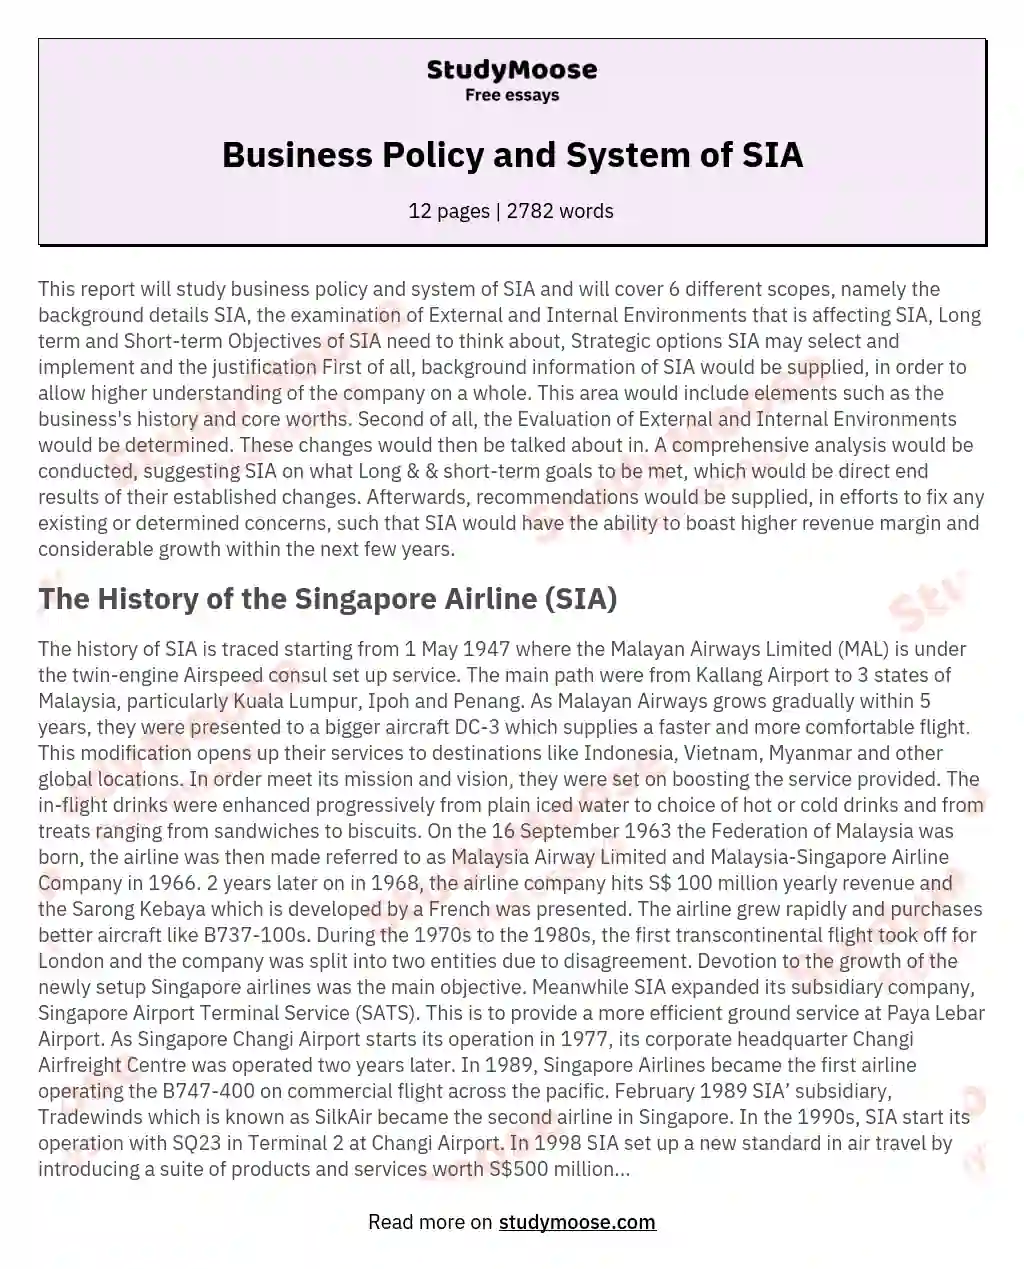 Business Policy and System of SIA essay